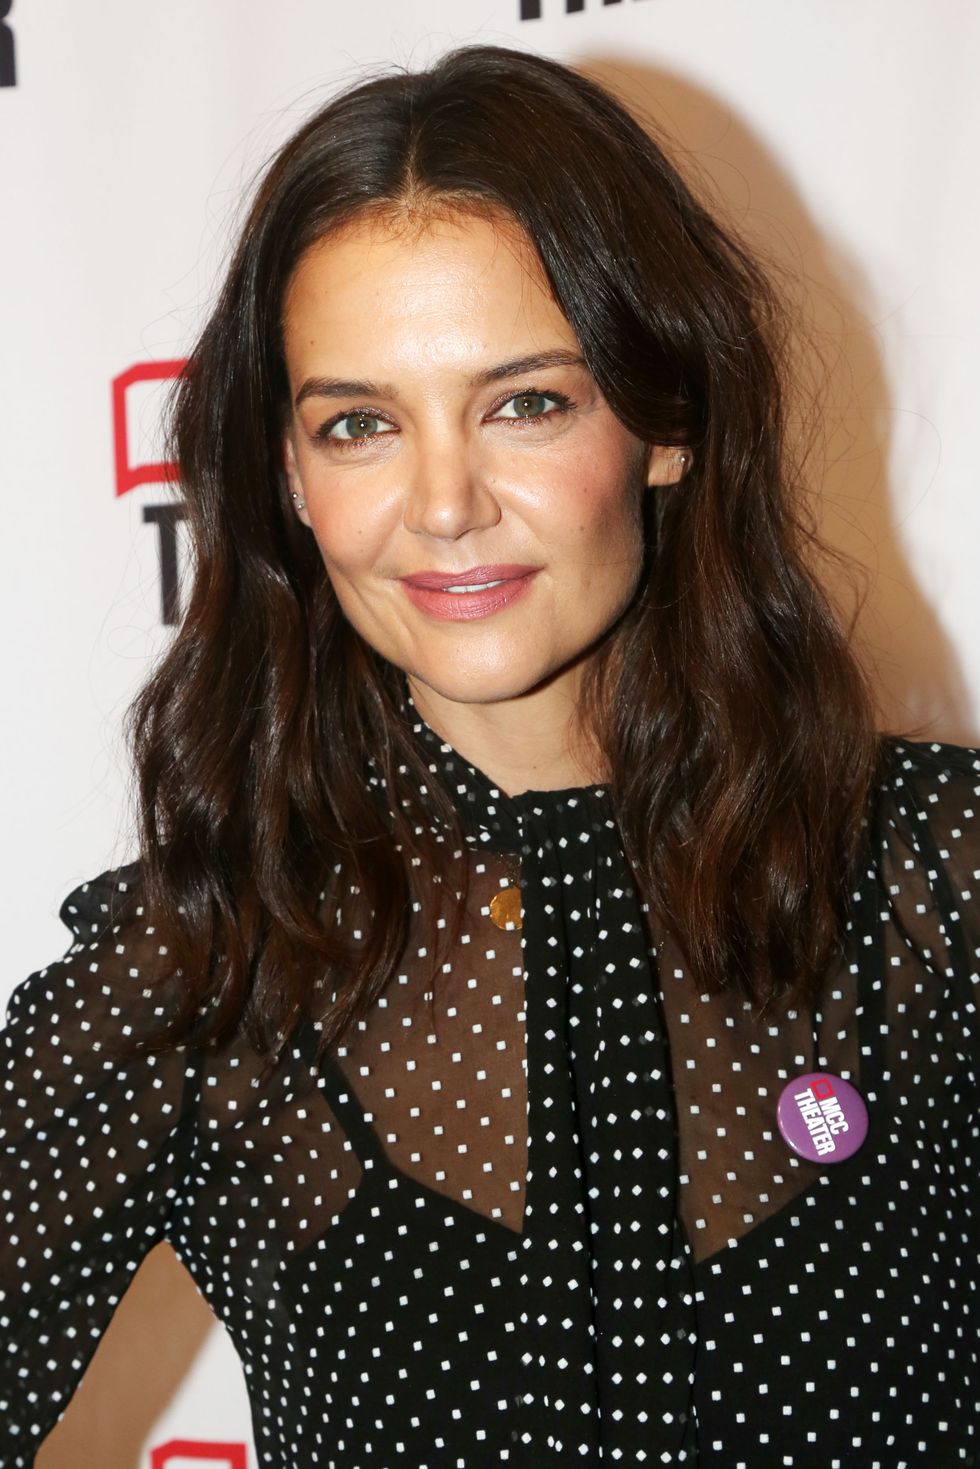 katie holmes outfits see through top instagram reaction